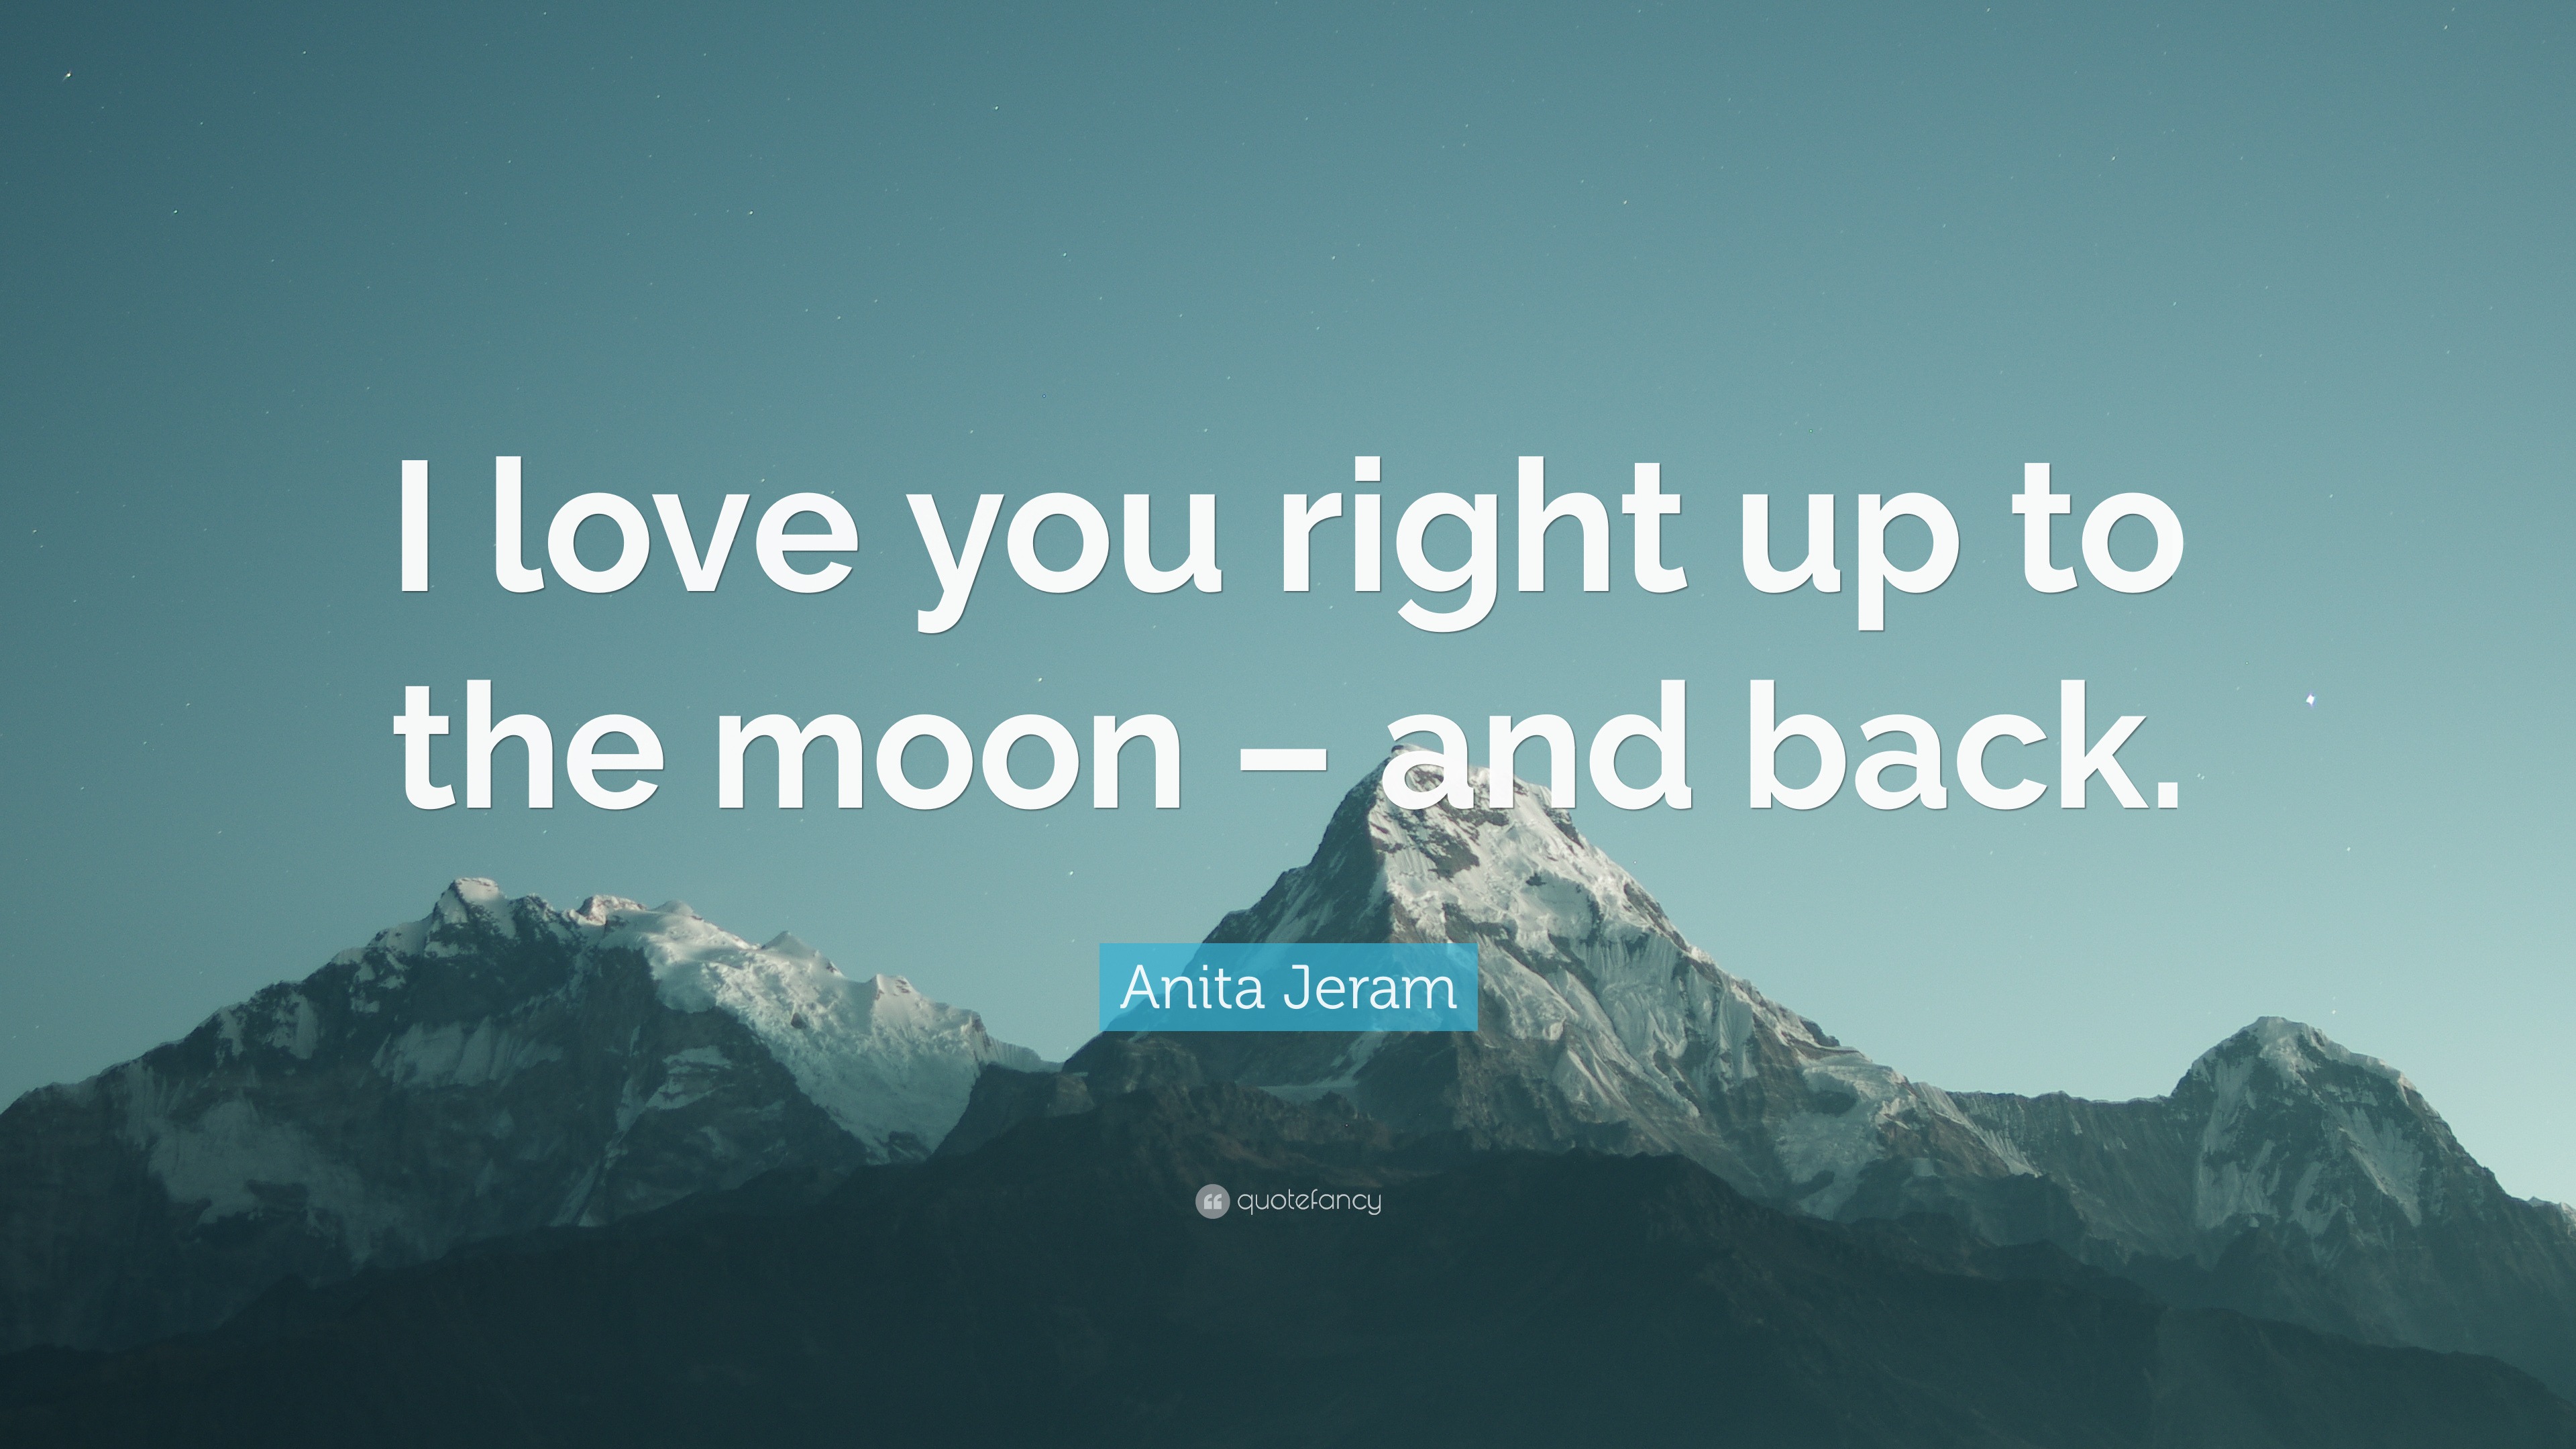 Anita Jeram Quote “I love you right up to the moon – and back